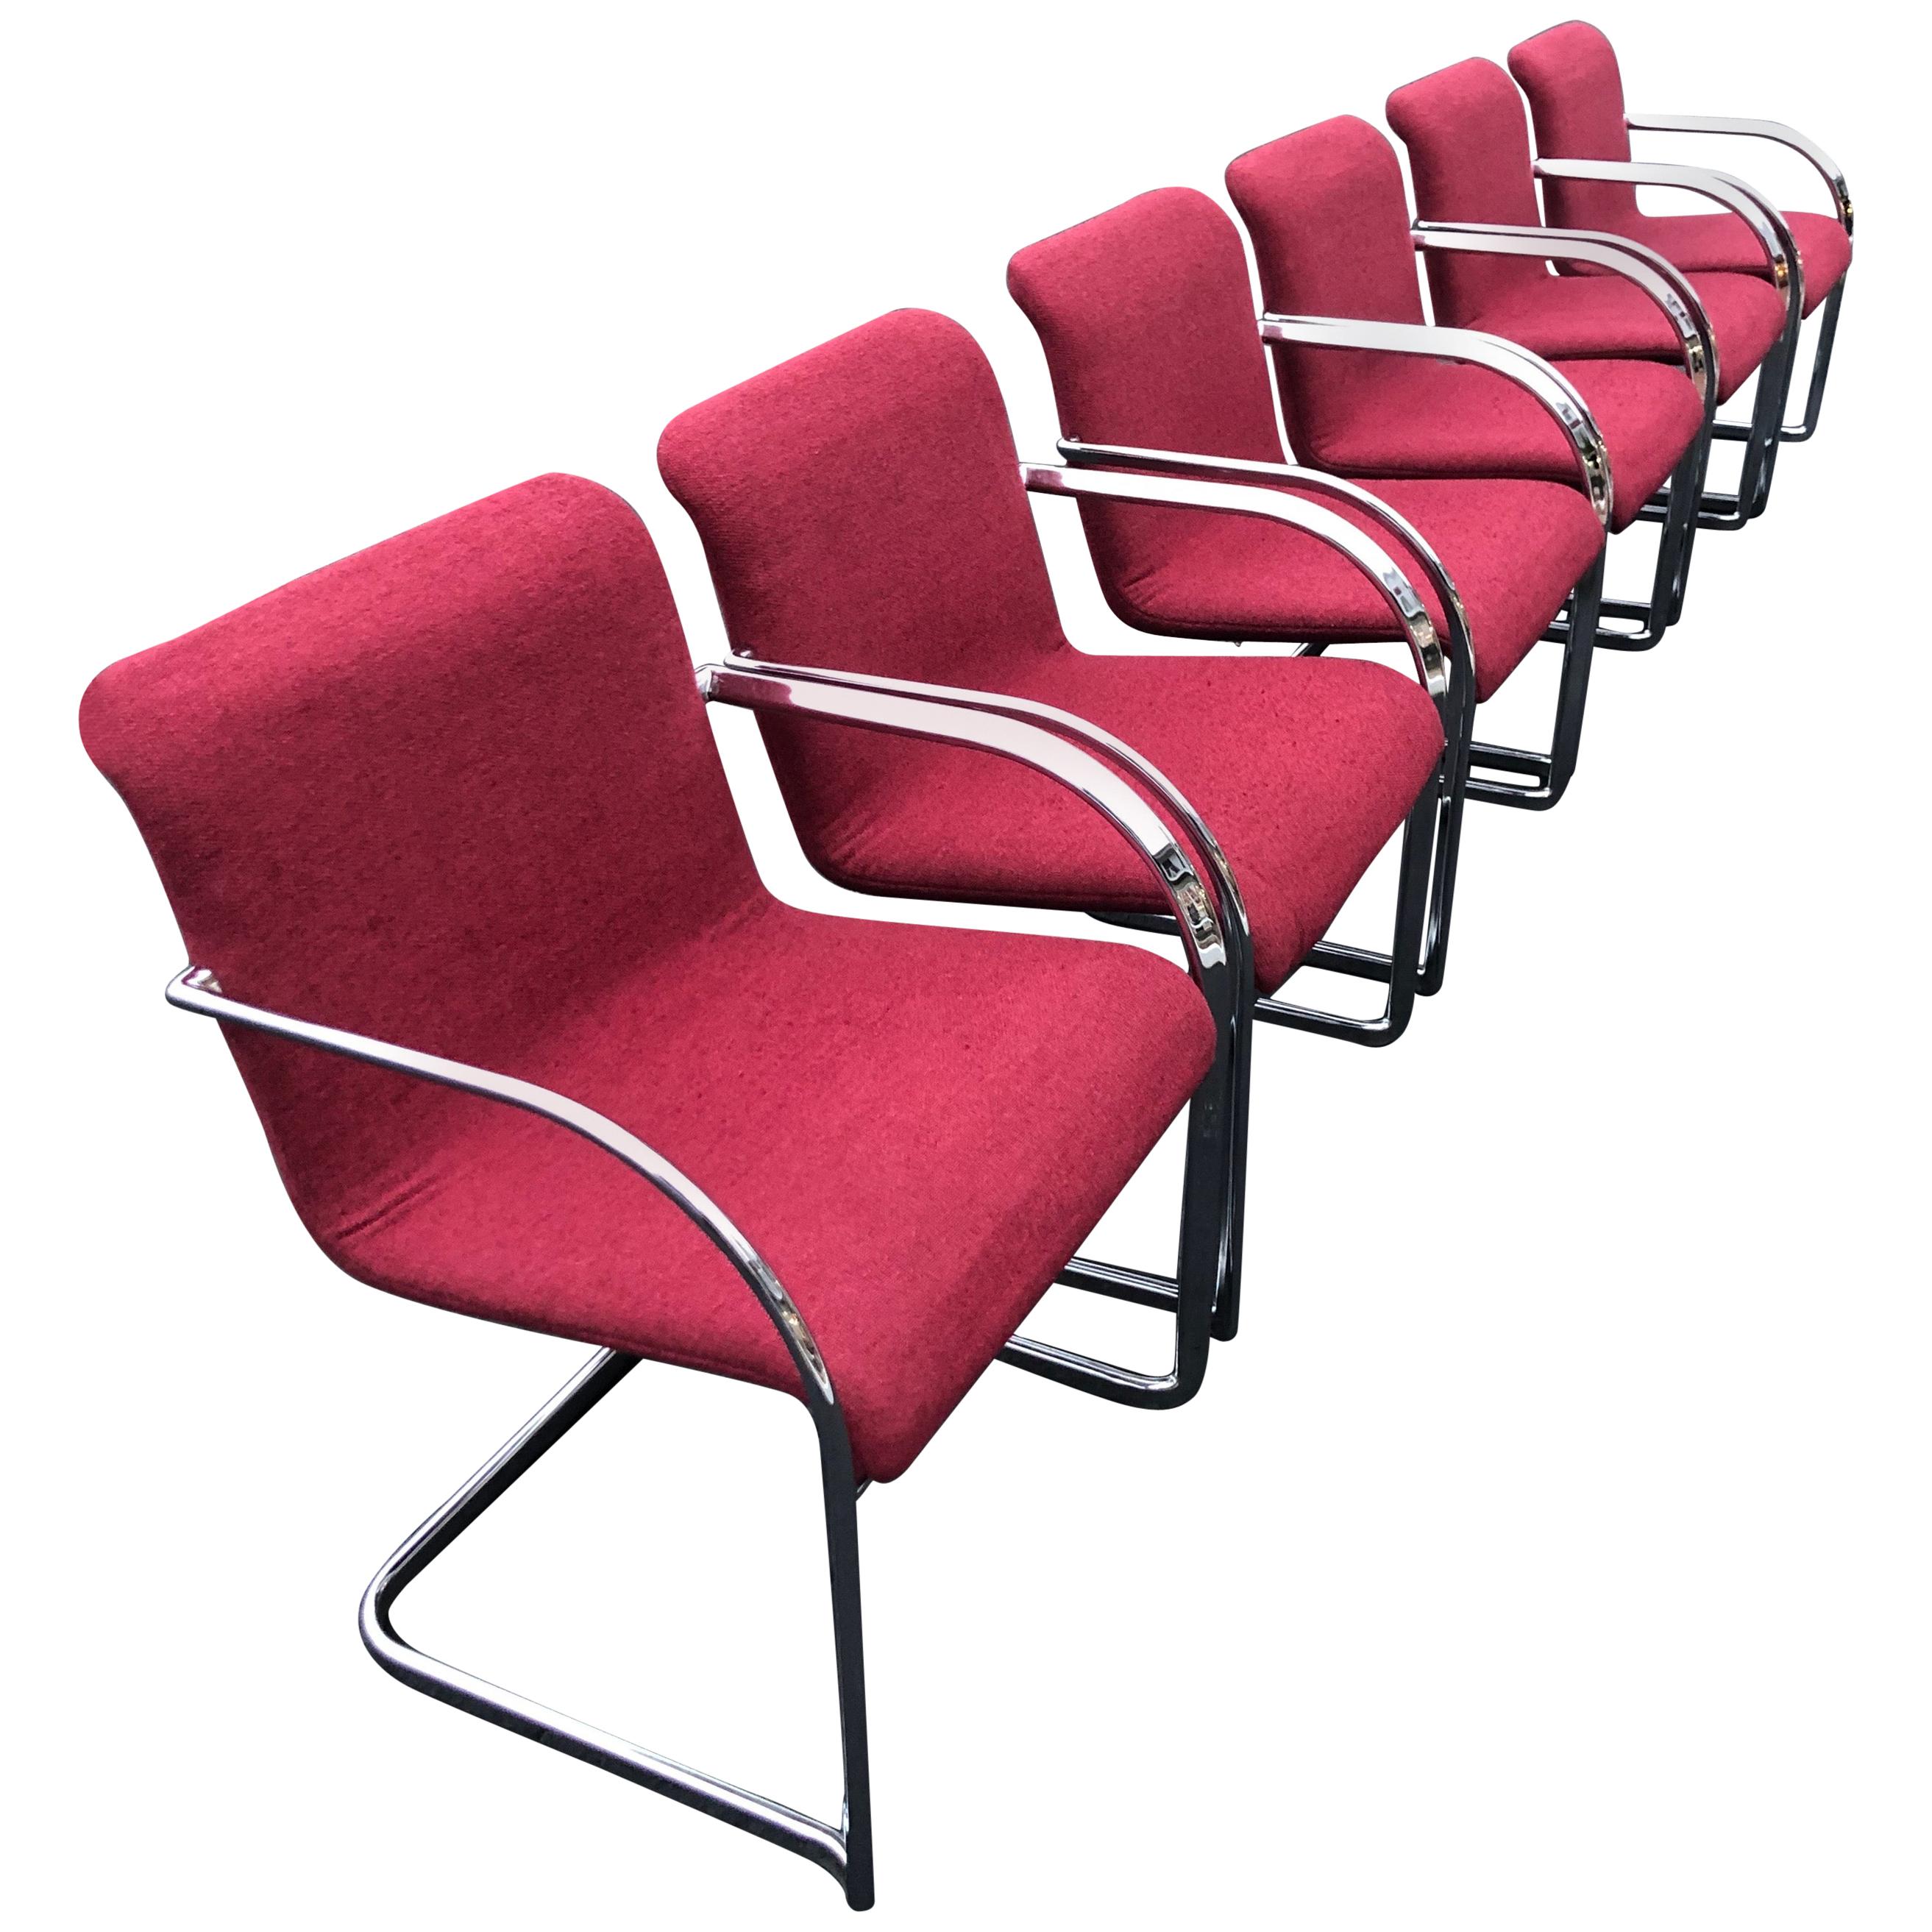 Set of Six Raspberry and Chrome Dining or Office Chairs